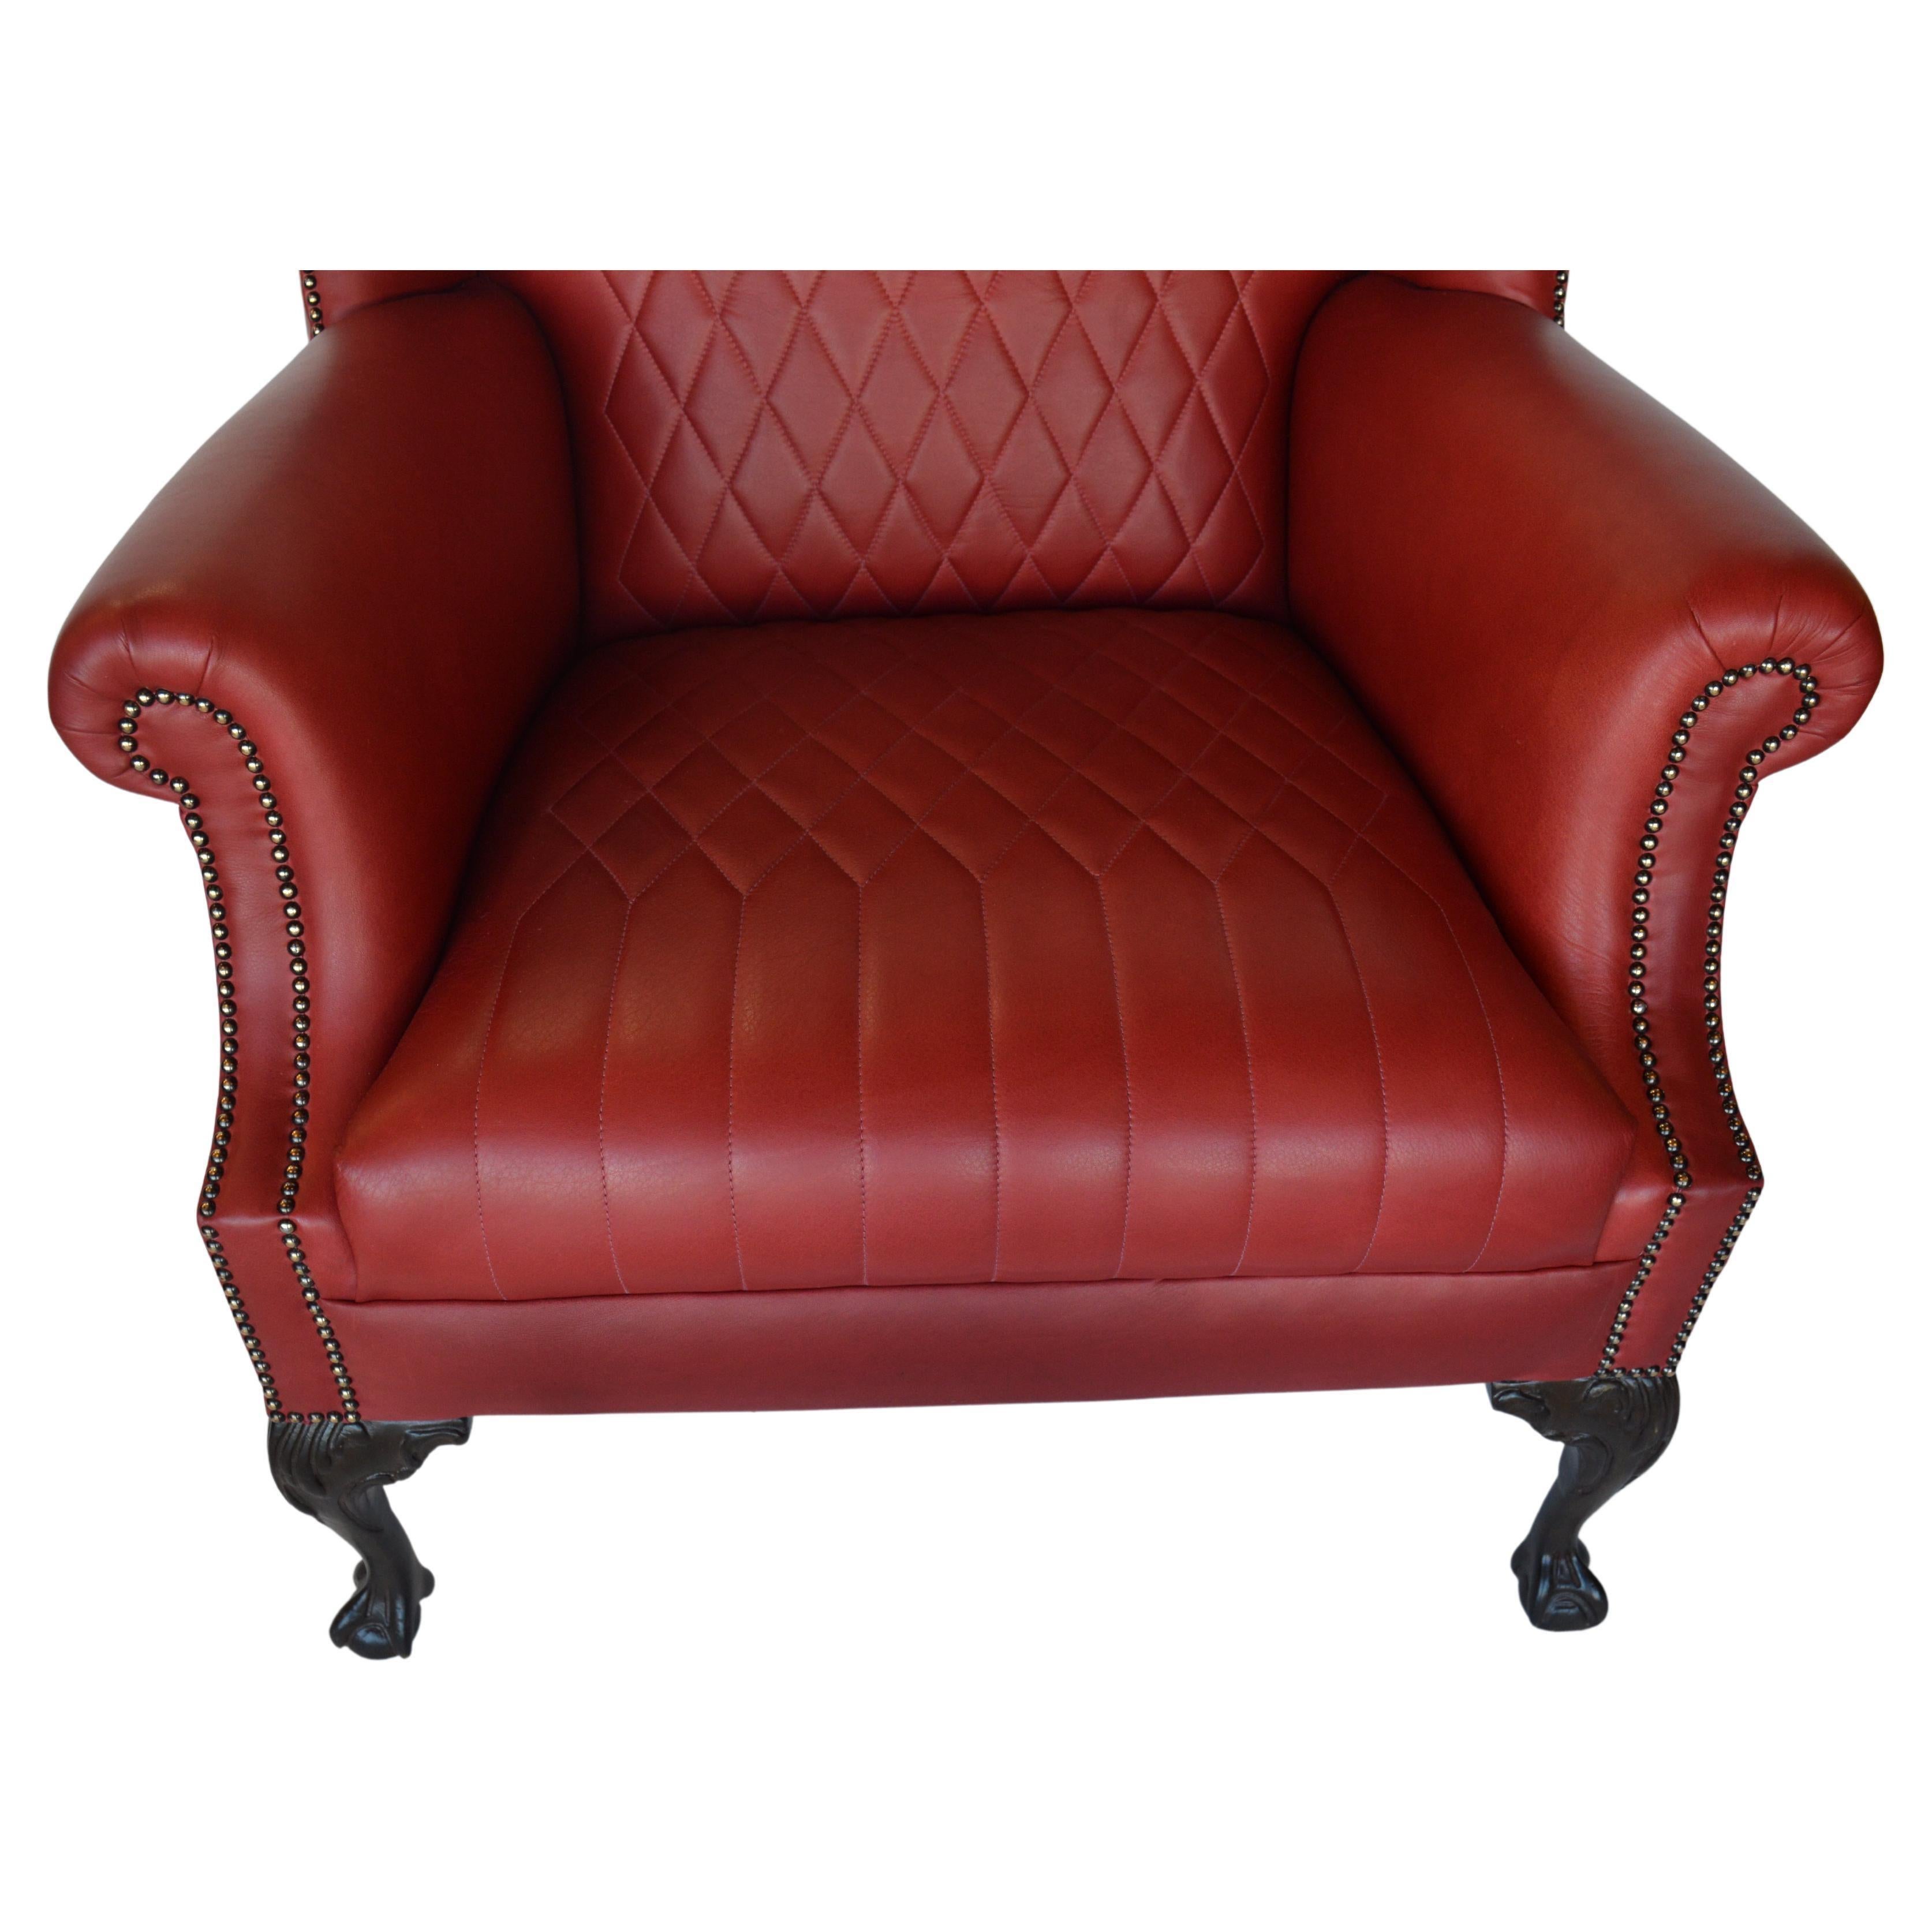 Late 19th Century, English Wingback Leather Chair For Sale 2